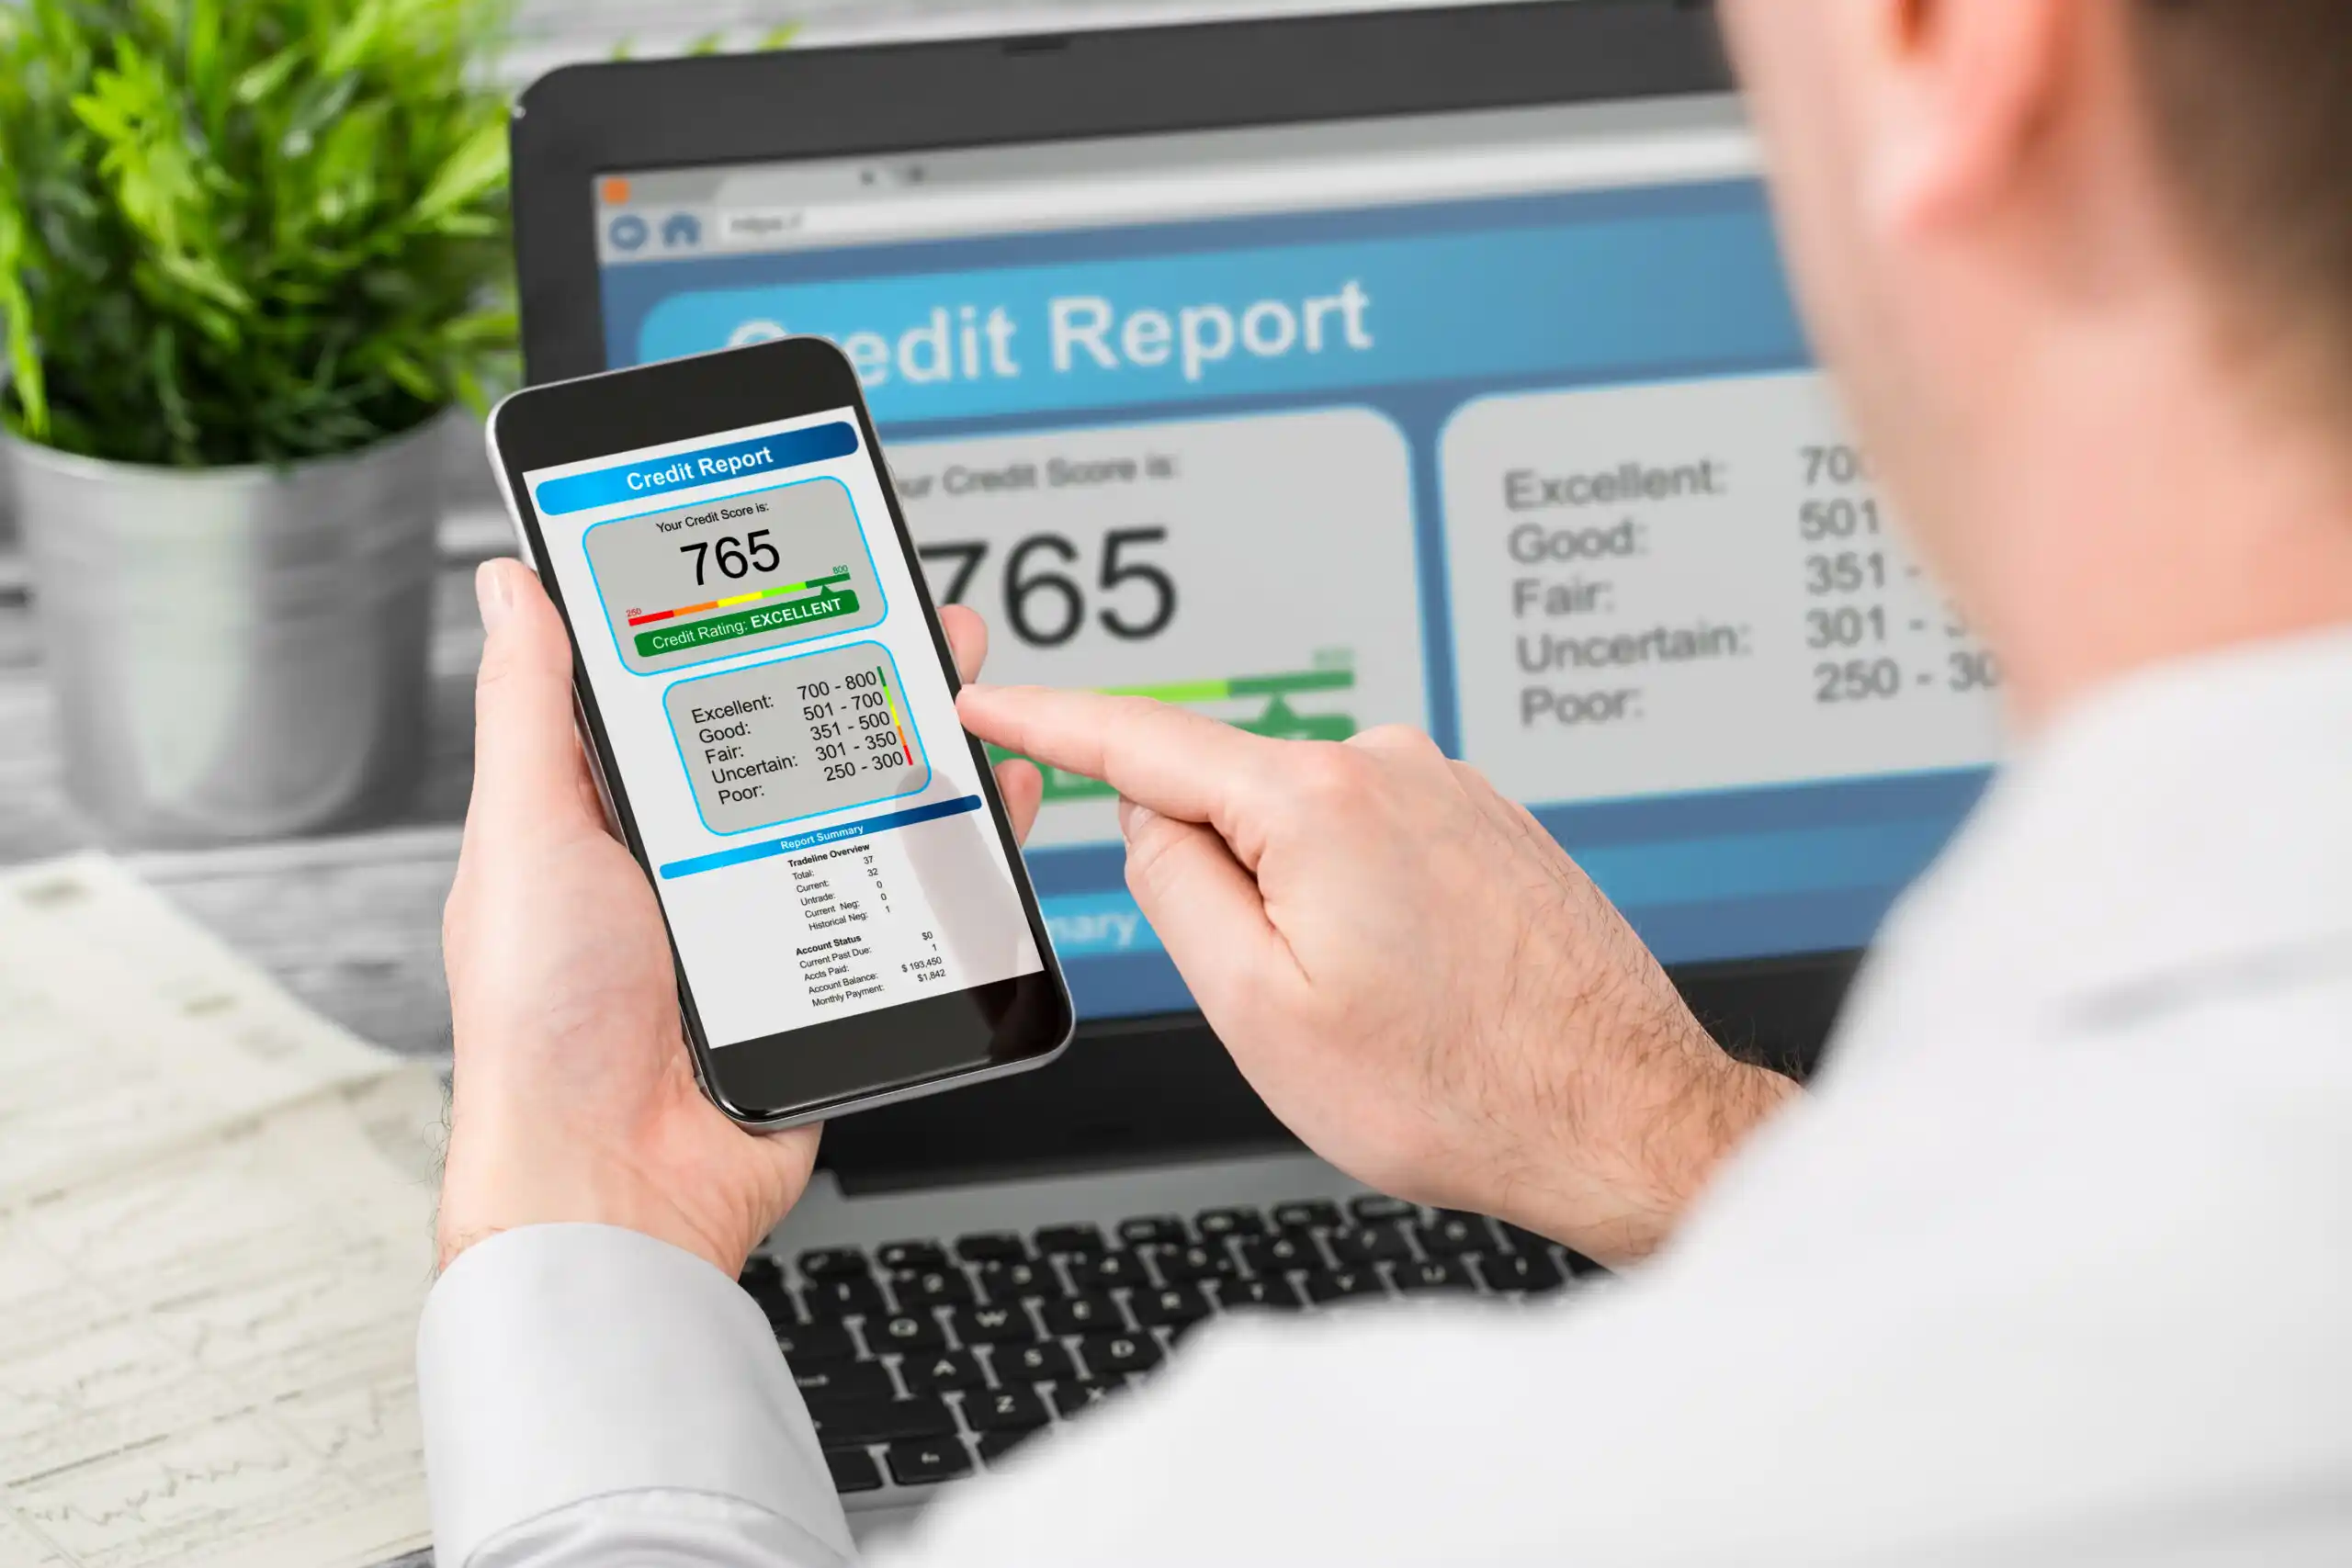 Who’s Judging You Based on Your Credit Report?